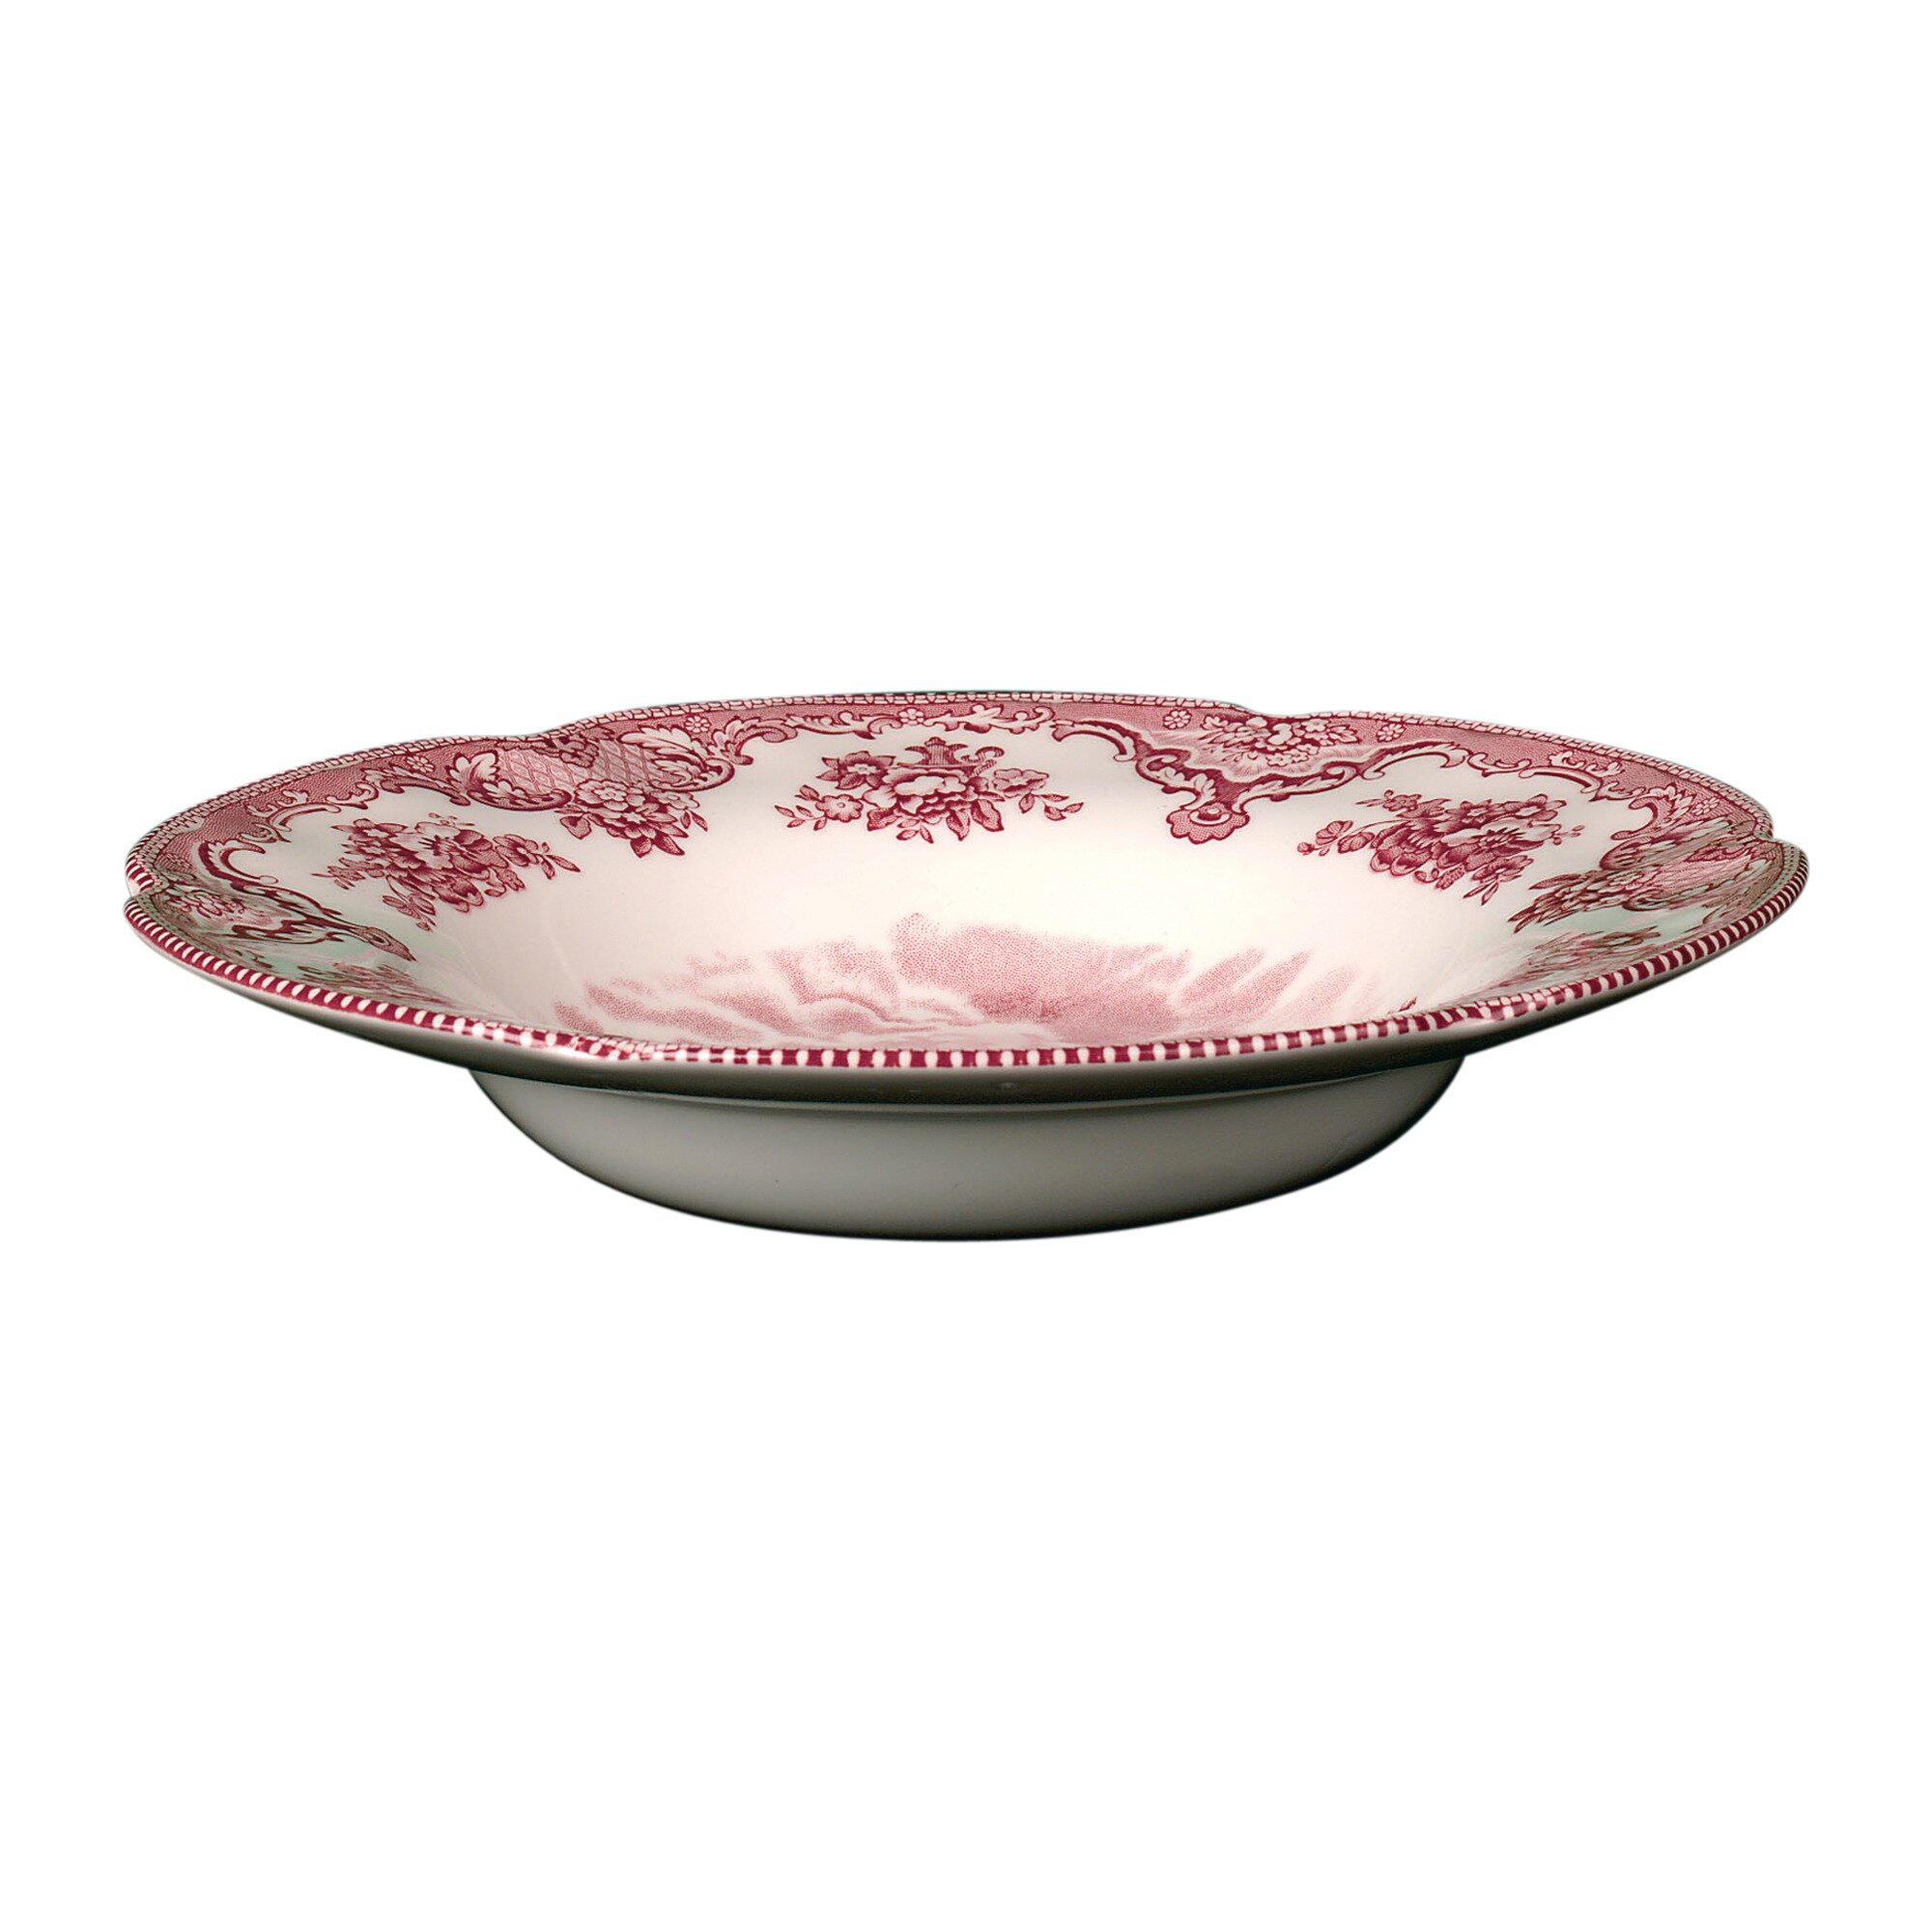 Chateau Pink Set of 4 Soup Cereal Bowls